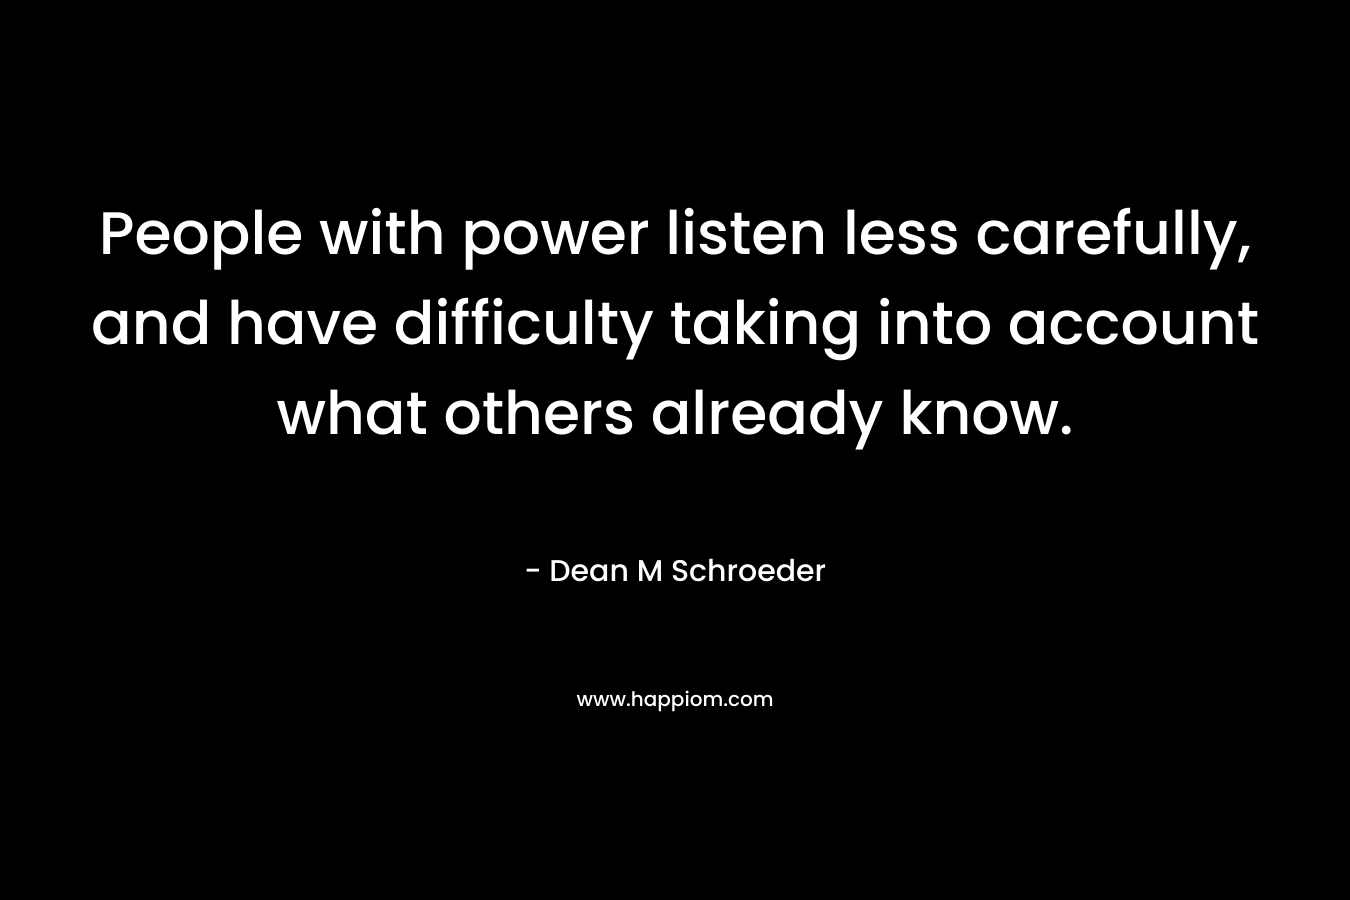 People with power listen less carefully, and have difficulty taking into account what others already know.